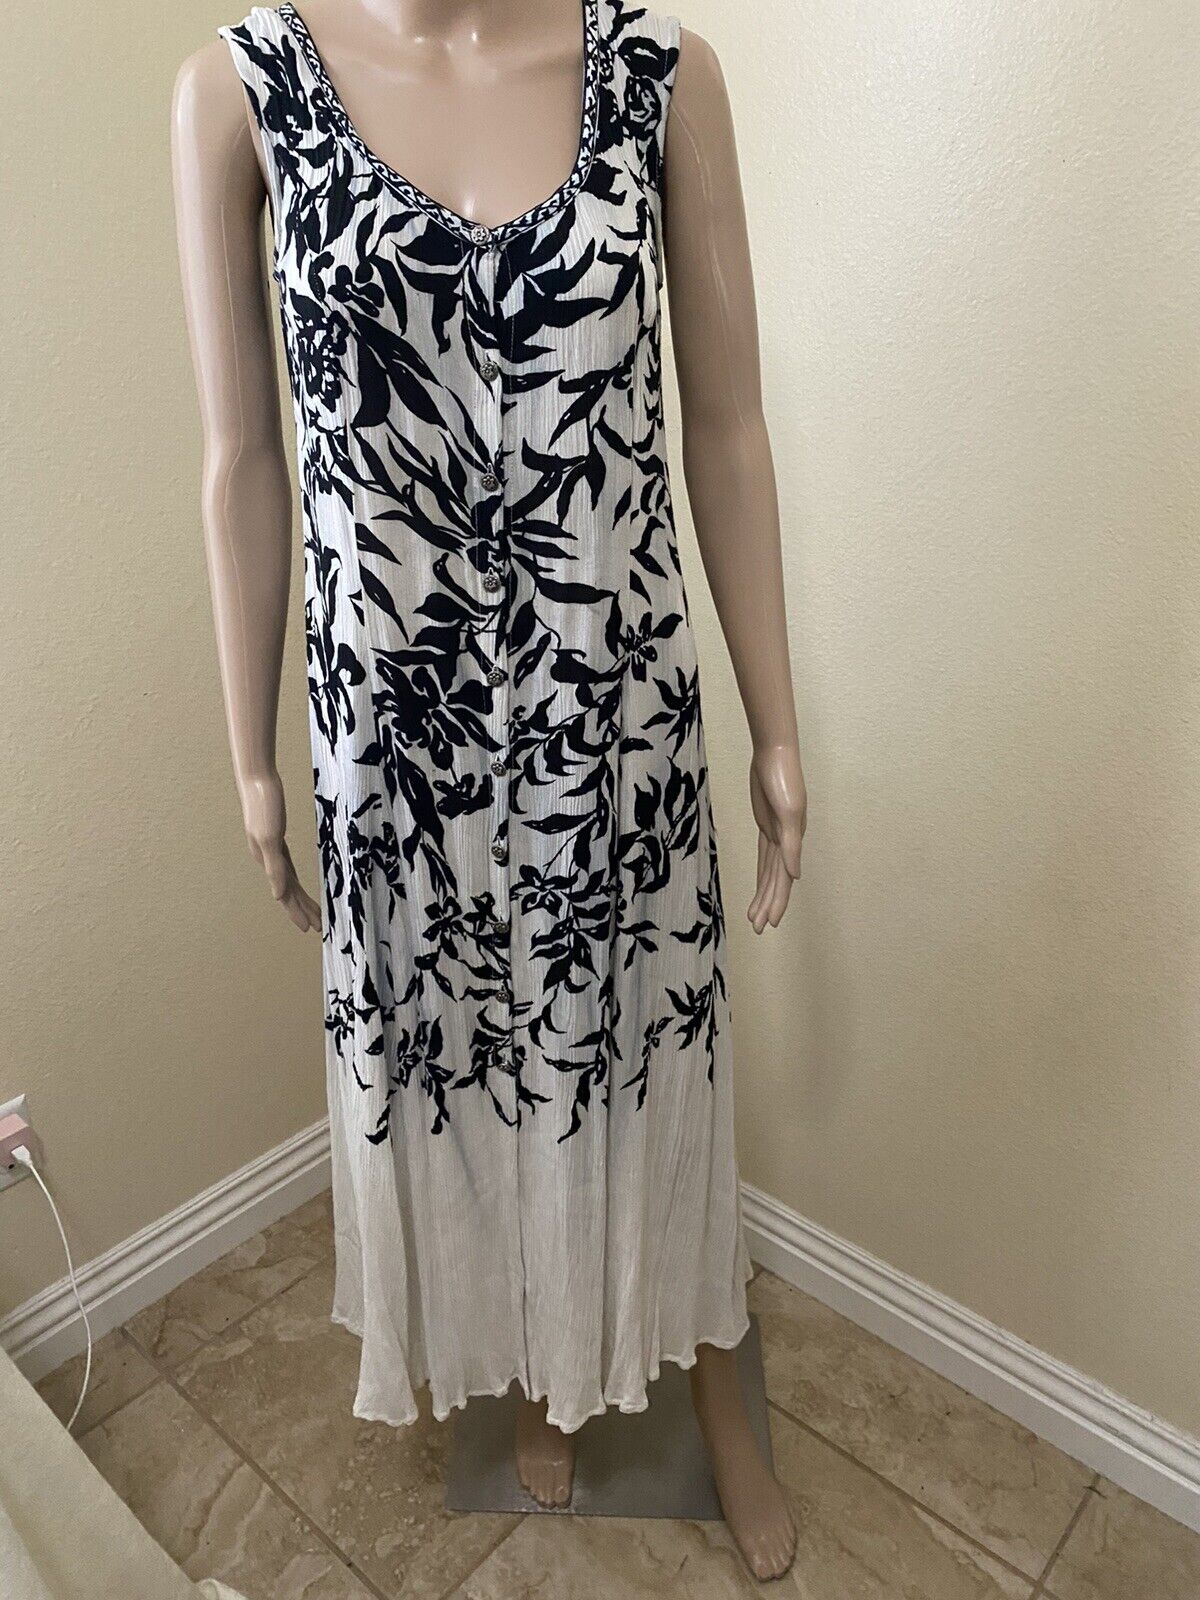 black and white floral rayon dress cruise casual 6 - image 1